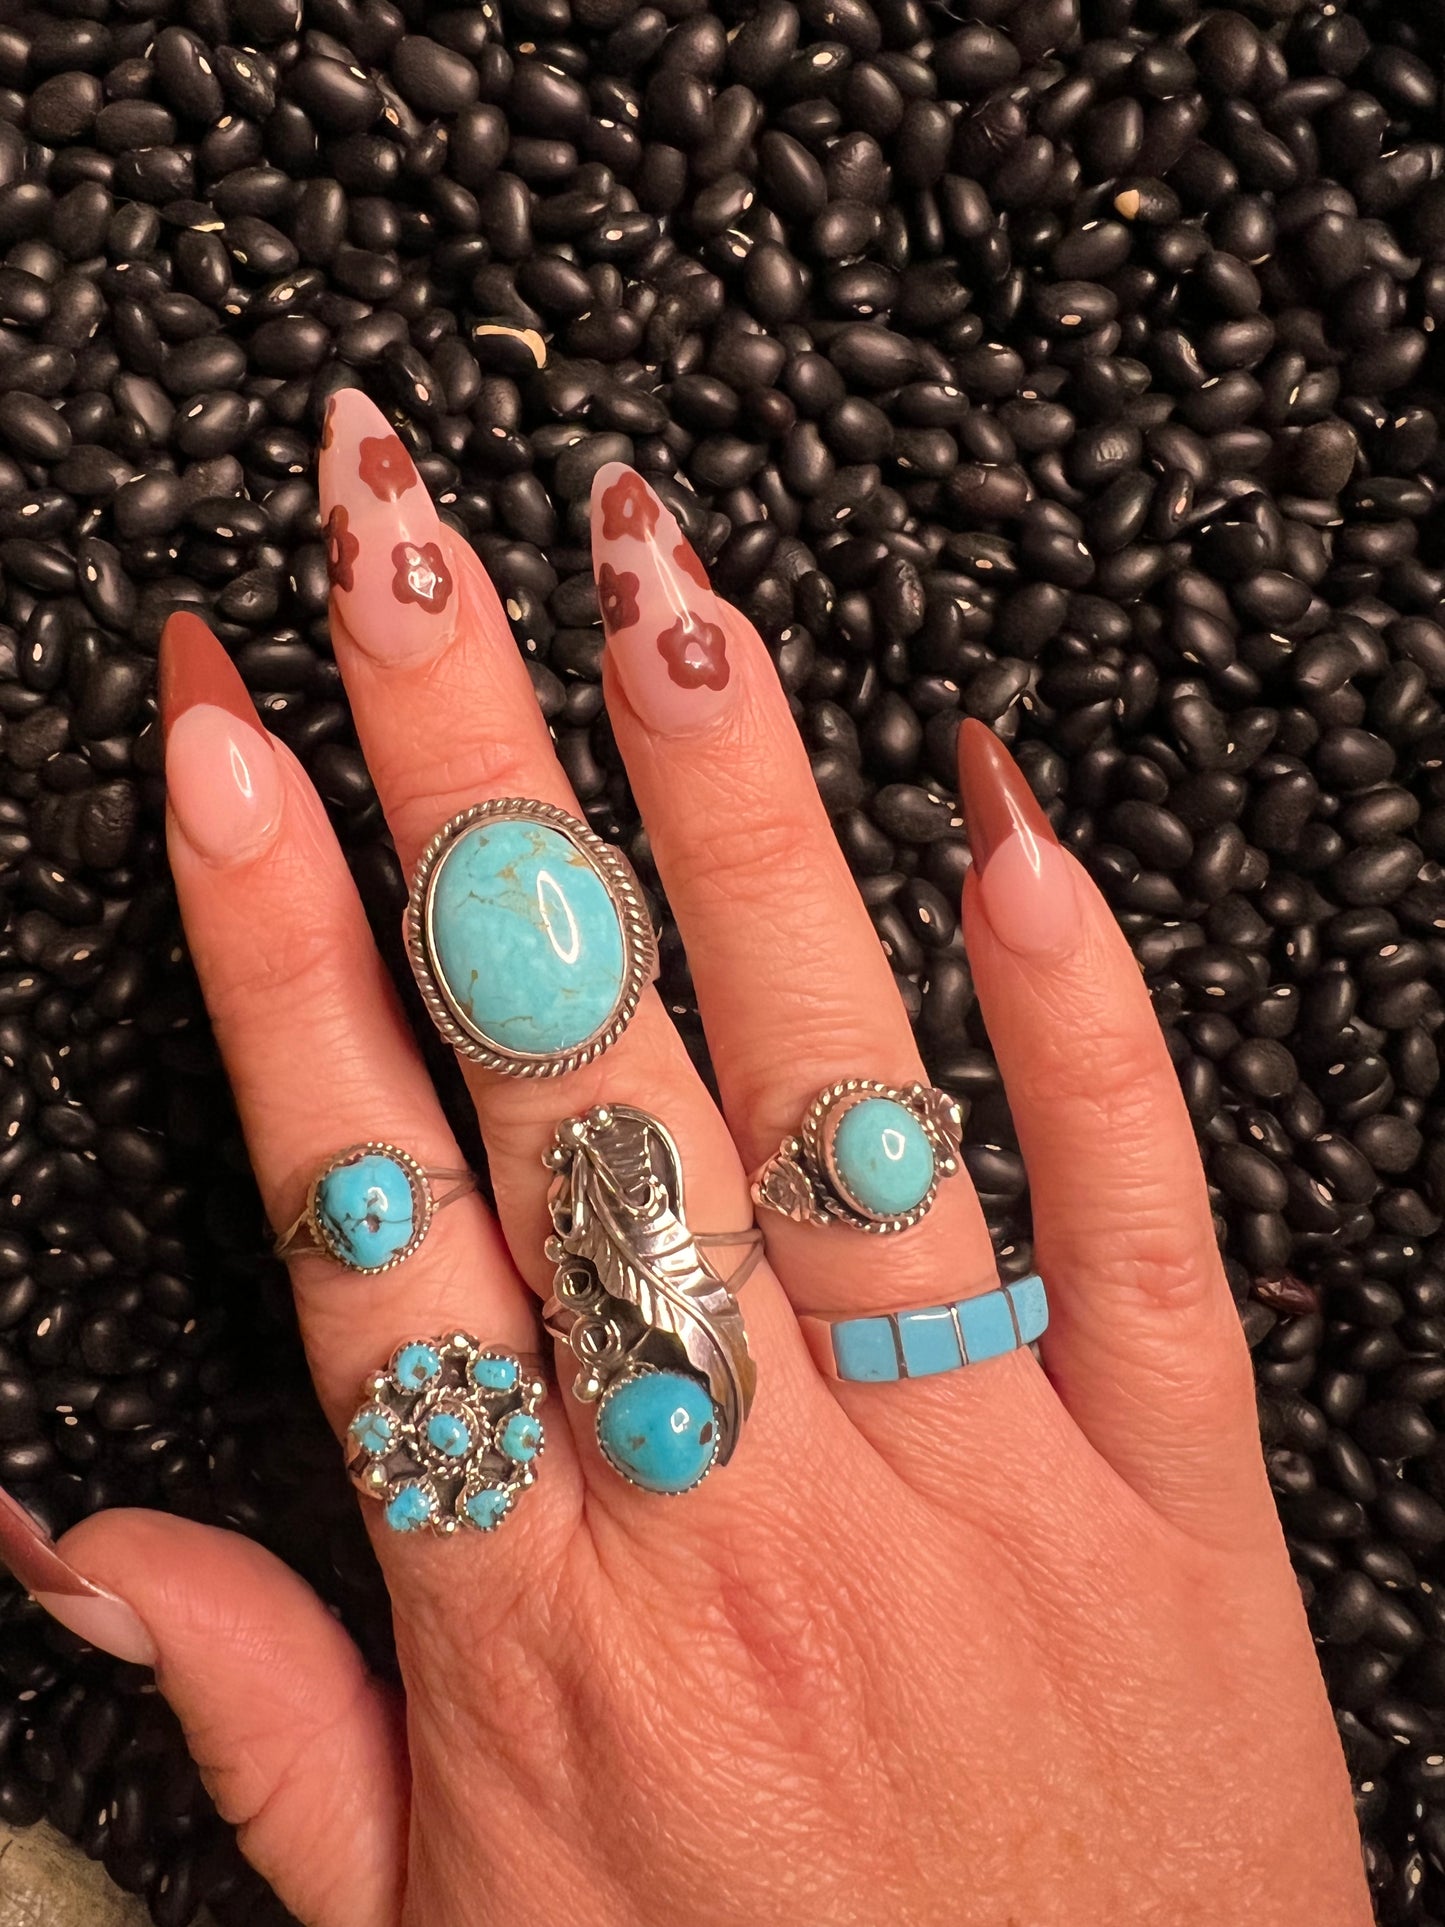 Flower Cluster Ring with genuine turquoise